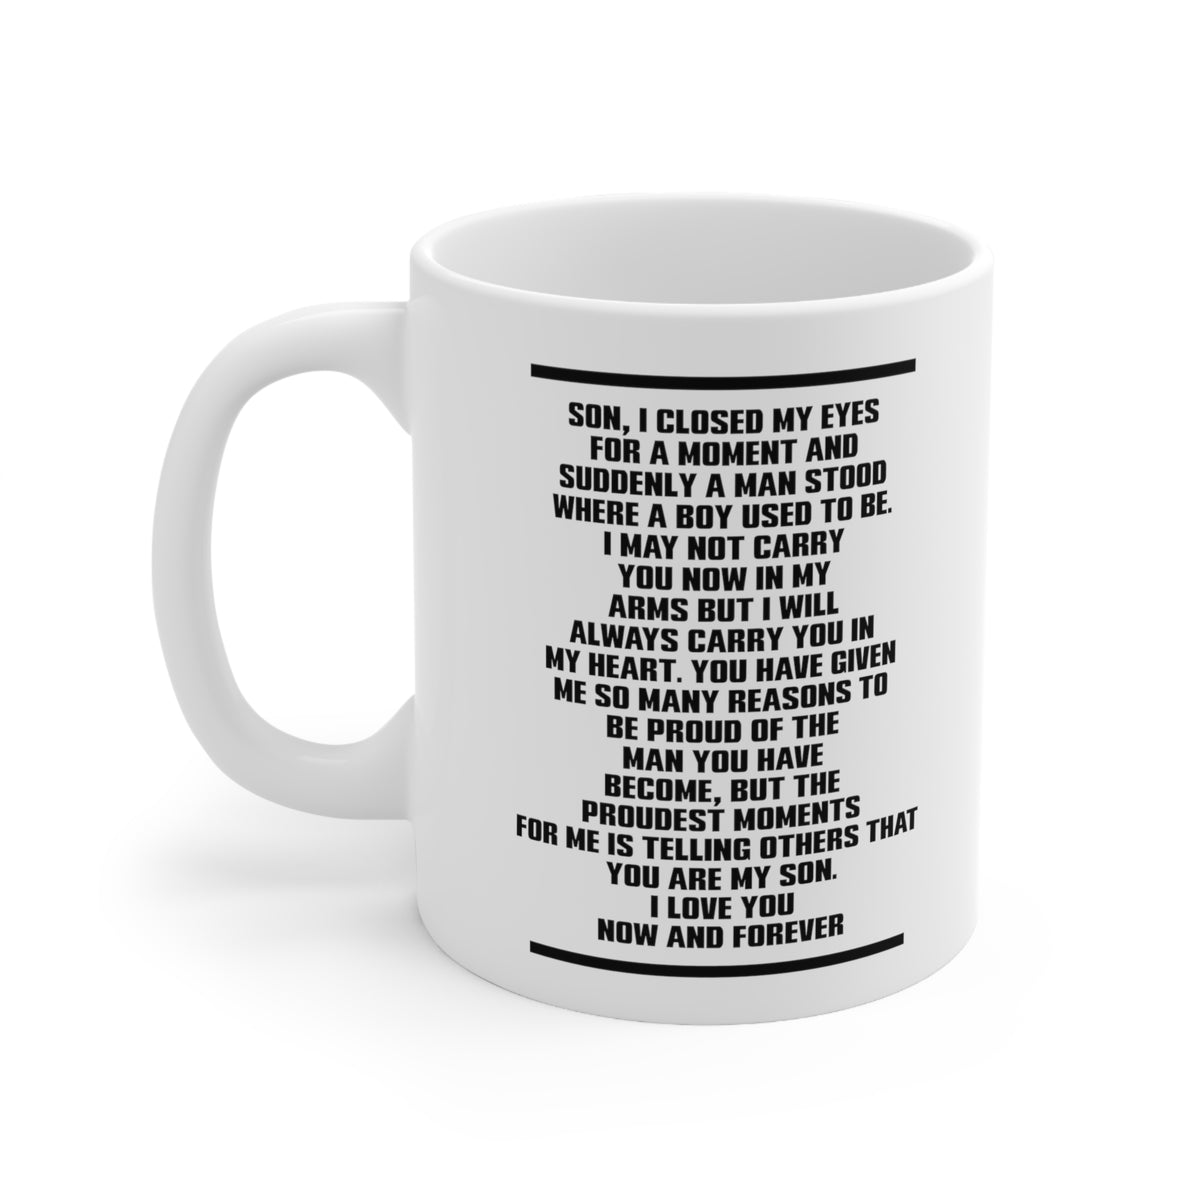 Son, I Closed My Eyes For A Moment And Suddenly A Man Stood Where A Boy Used To Be - Veteran White Coffee Mug, Tea Cup